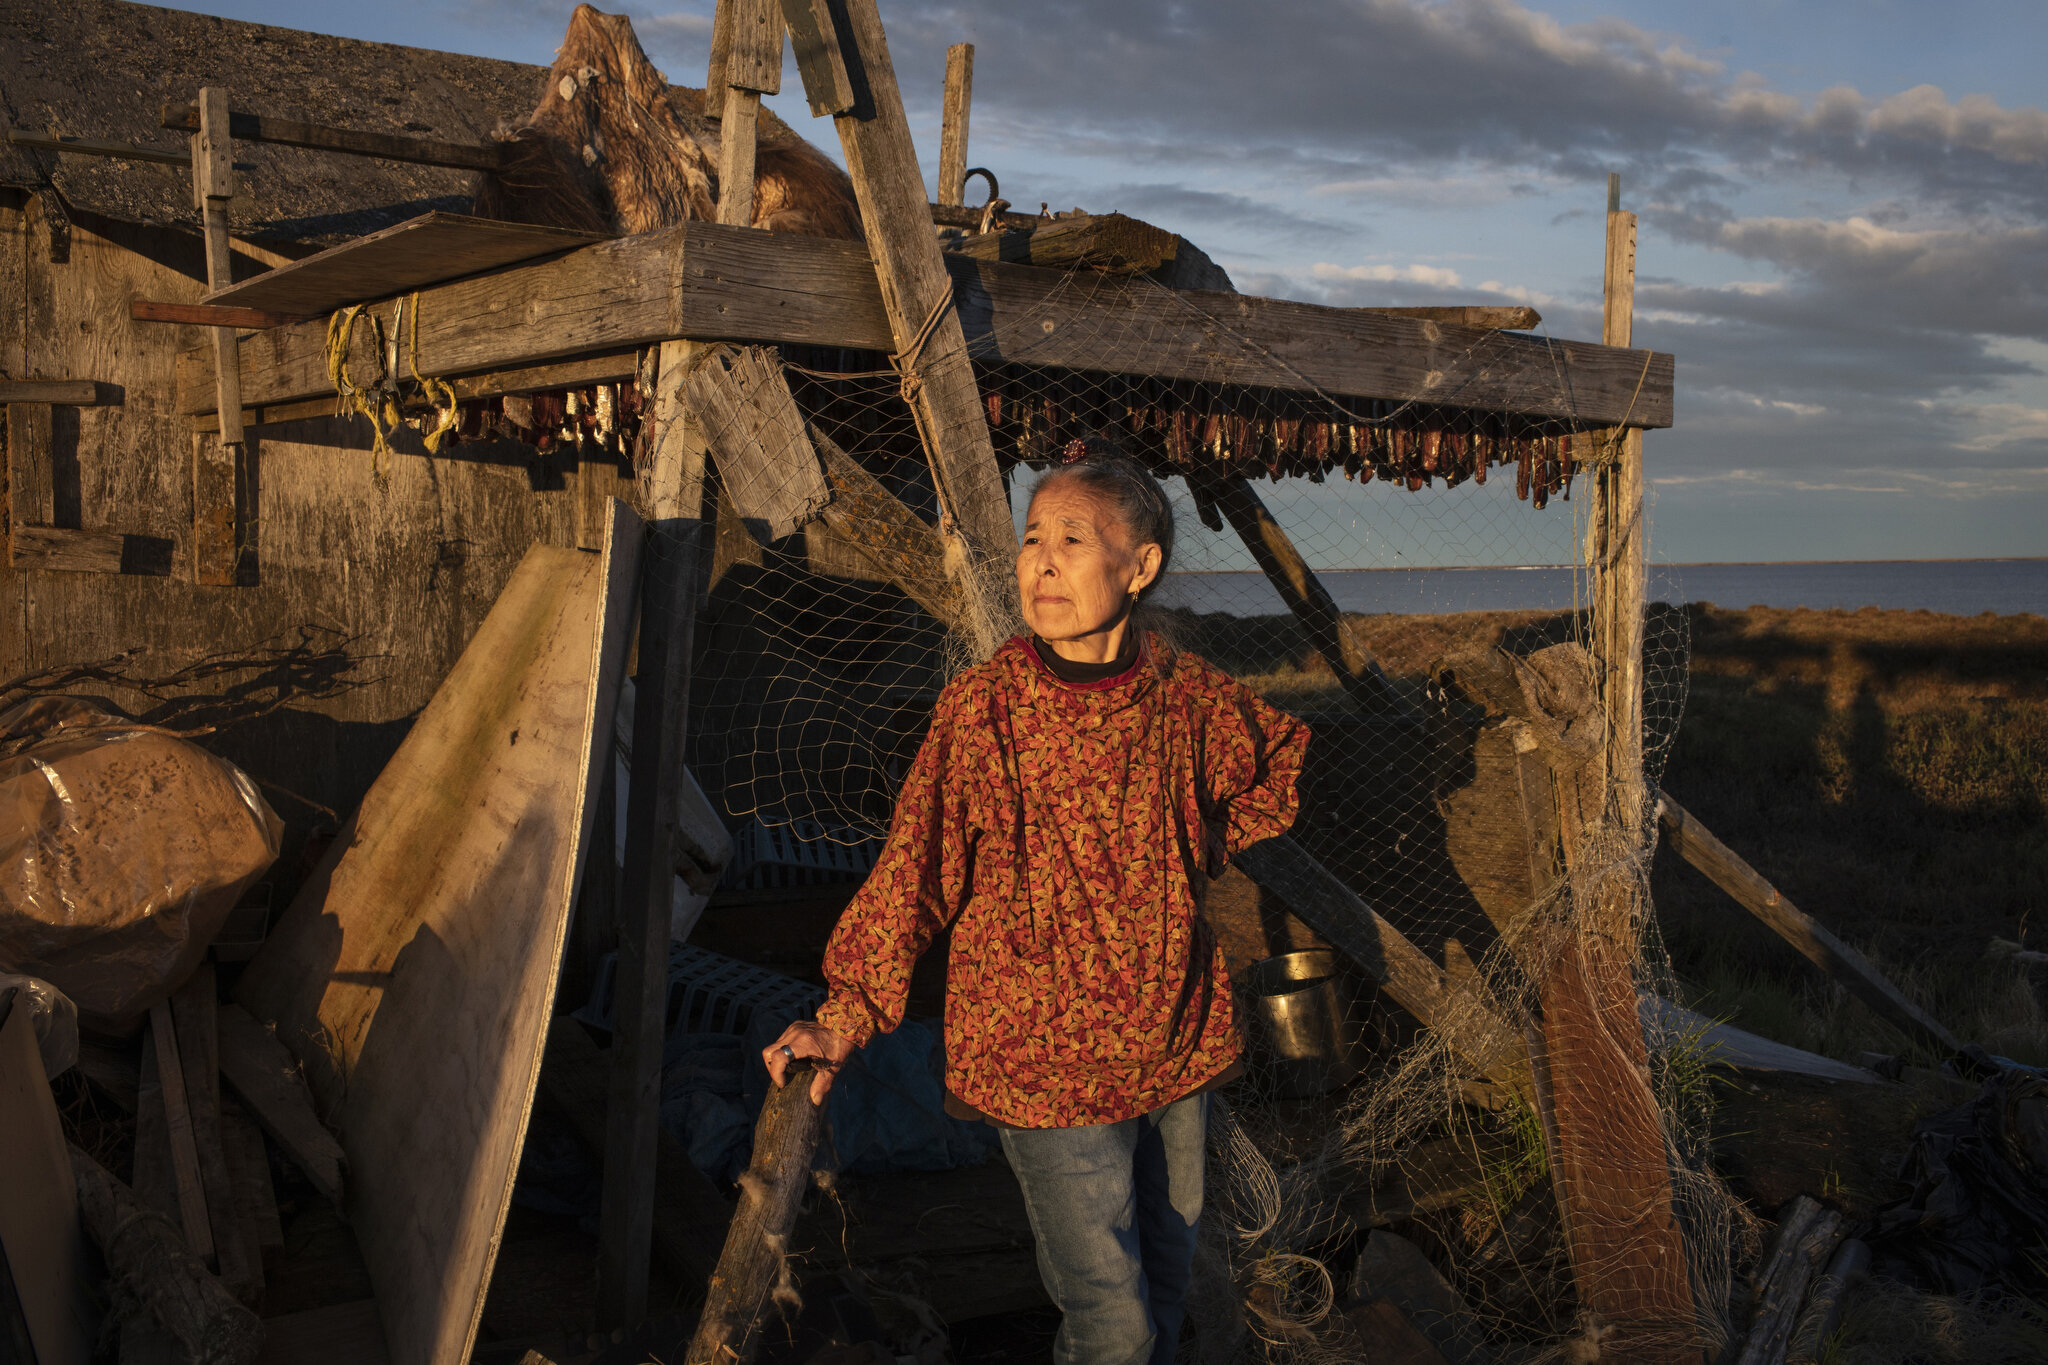  Monica Kasayuli dries herring in a shed outside her then-home in Newtok, Alaska. At the time, Monica's home had been deemed unsafe and she was packing up her family to move to temporary FEMA housing. Currently Monica and her children have left Newto